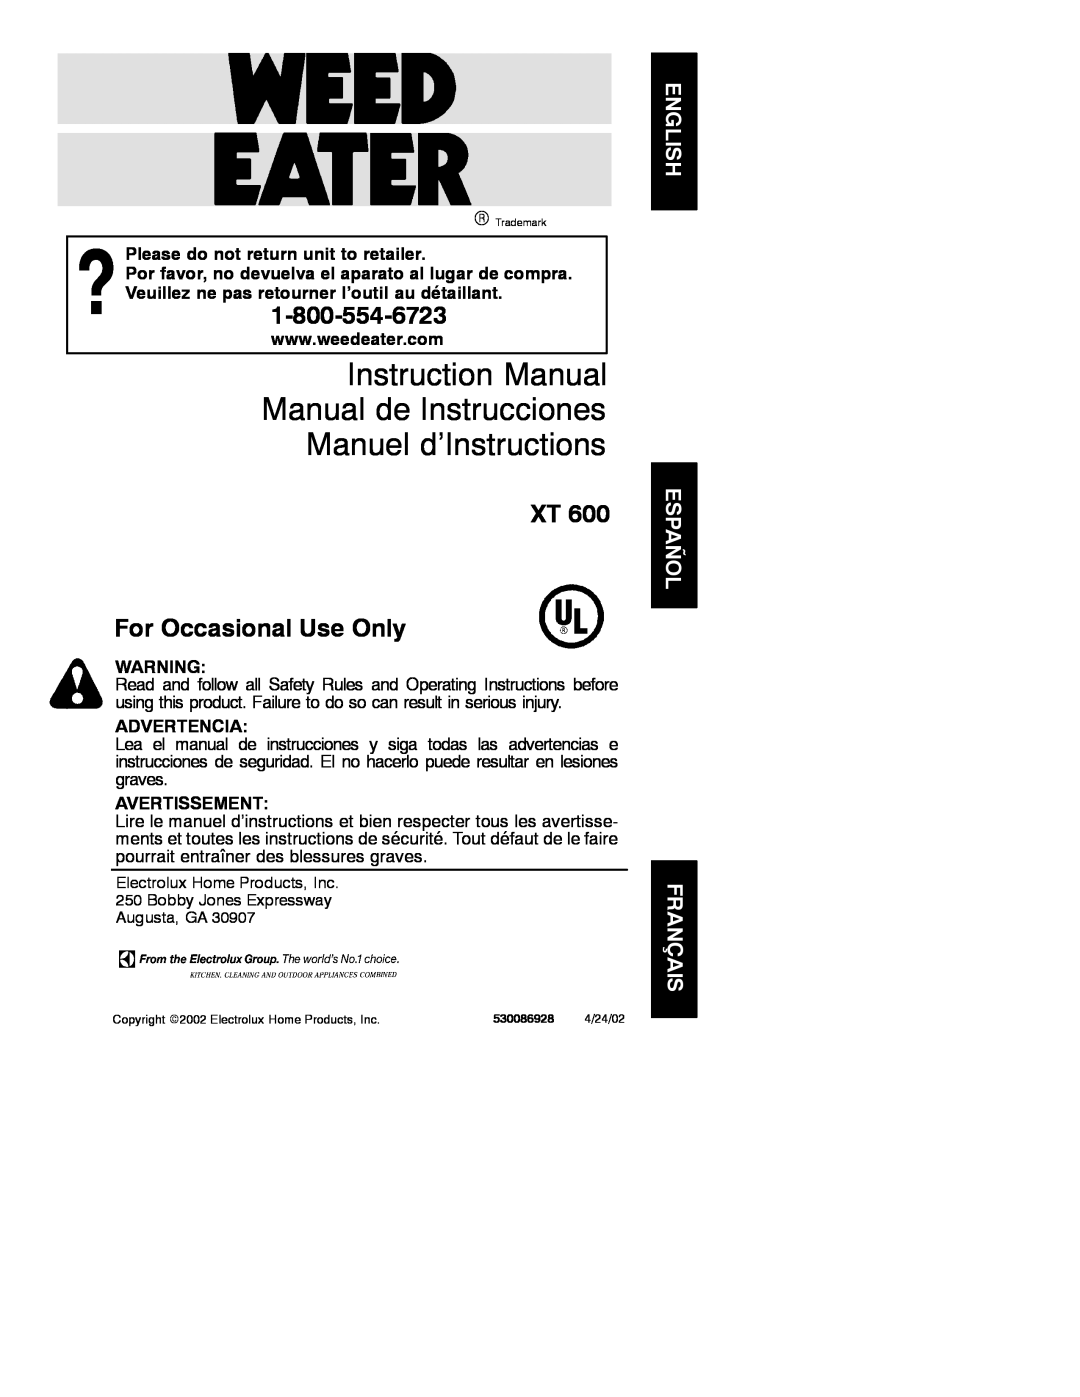 Weed Eater 530086928 instruction manual XT For Occasional Use Only, Please do not return unit to retailer, Advertencia 